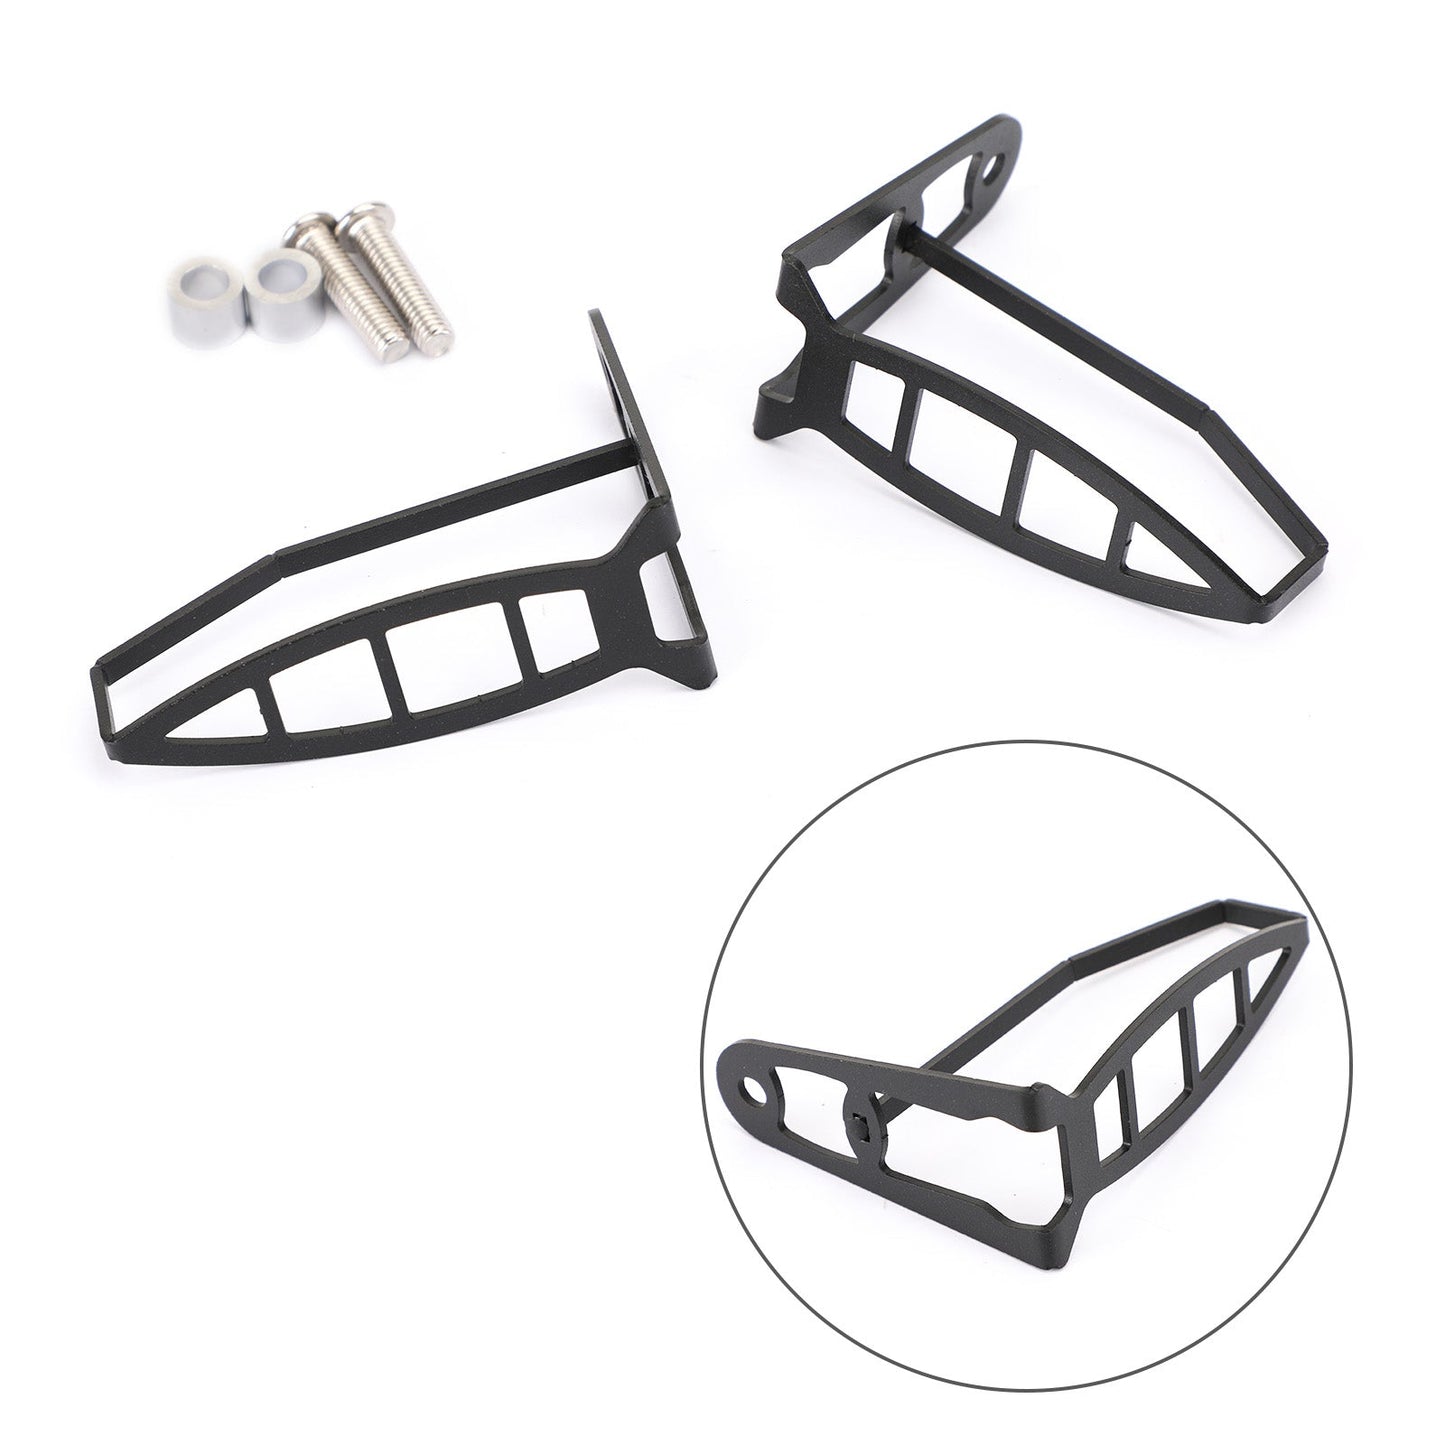 Motorcycle Rear Turn Signal Guard Cover fit for BMW F700GS F800GS F750GS 04-19